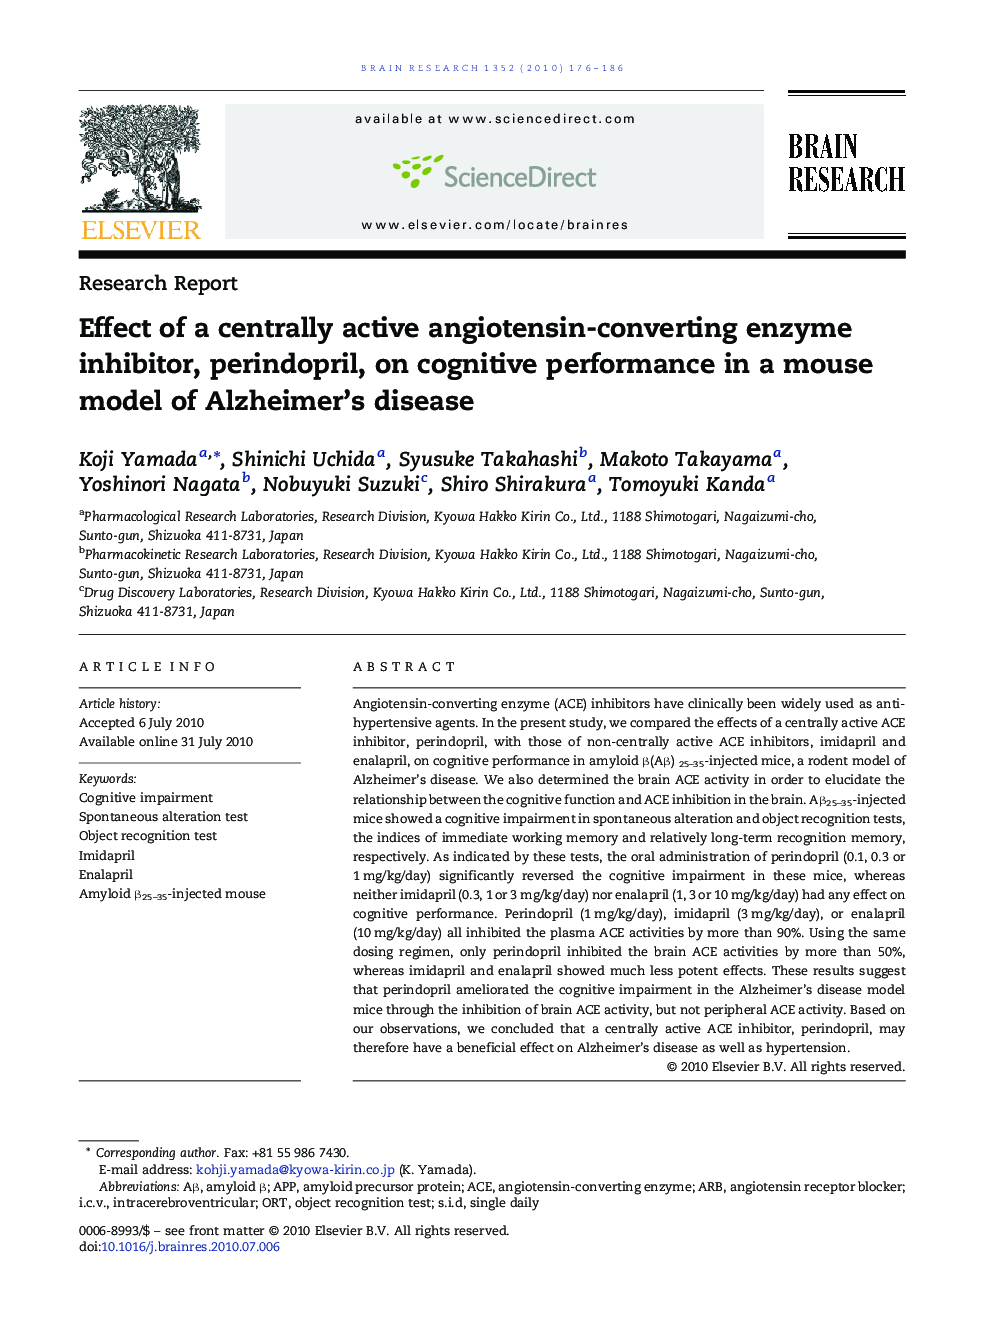 Effect of a centrally active angiotensin-converting enzyme inhibitor, perindopril, on cognitive performance in a mouse model of Alzheimer's disease